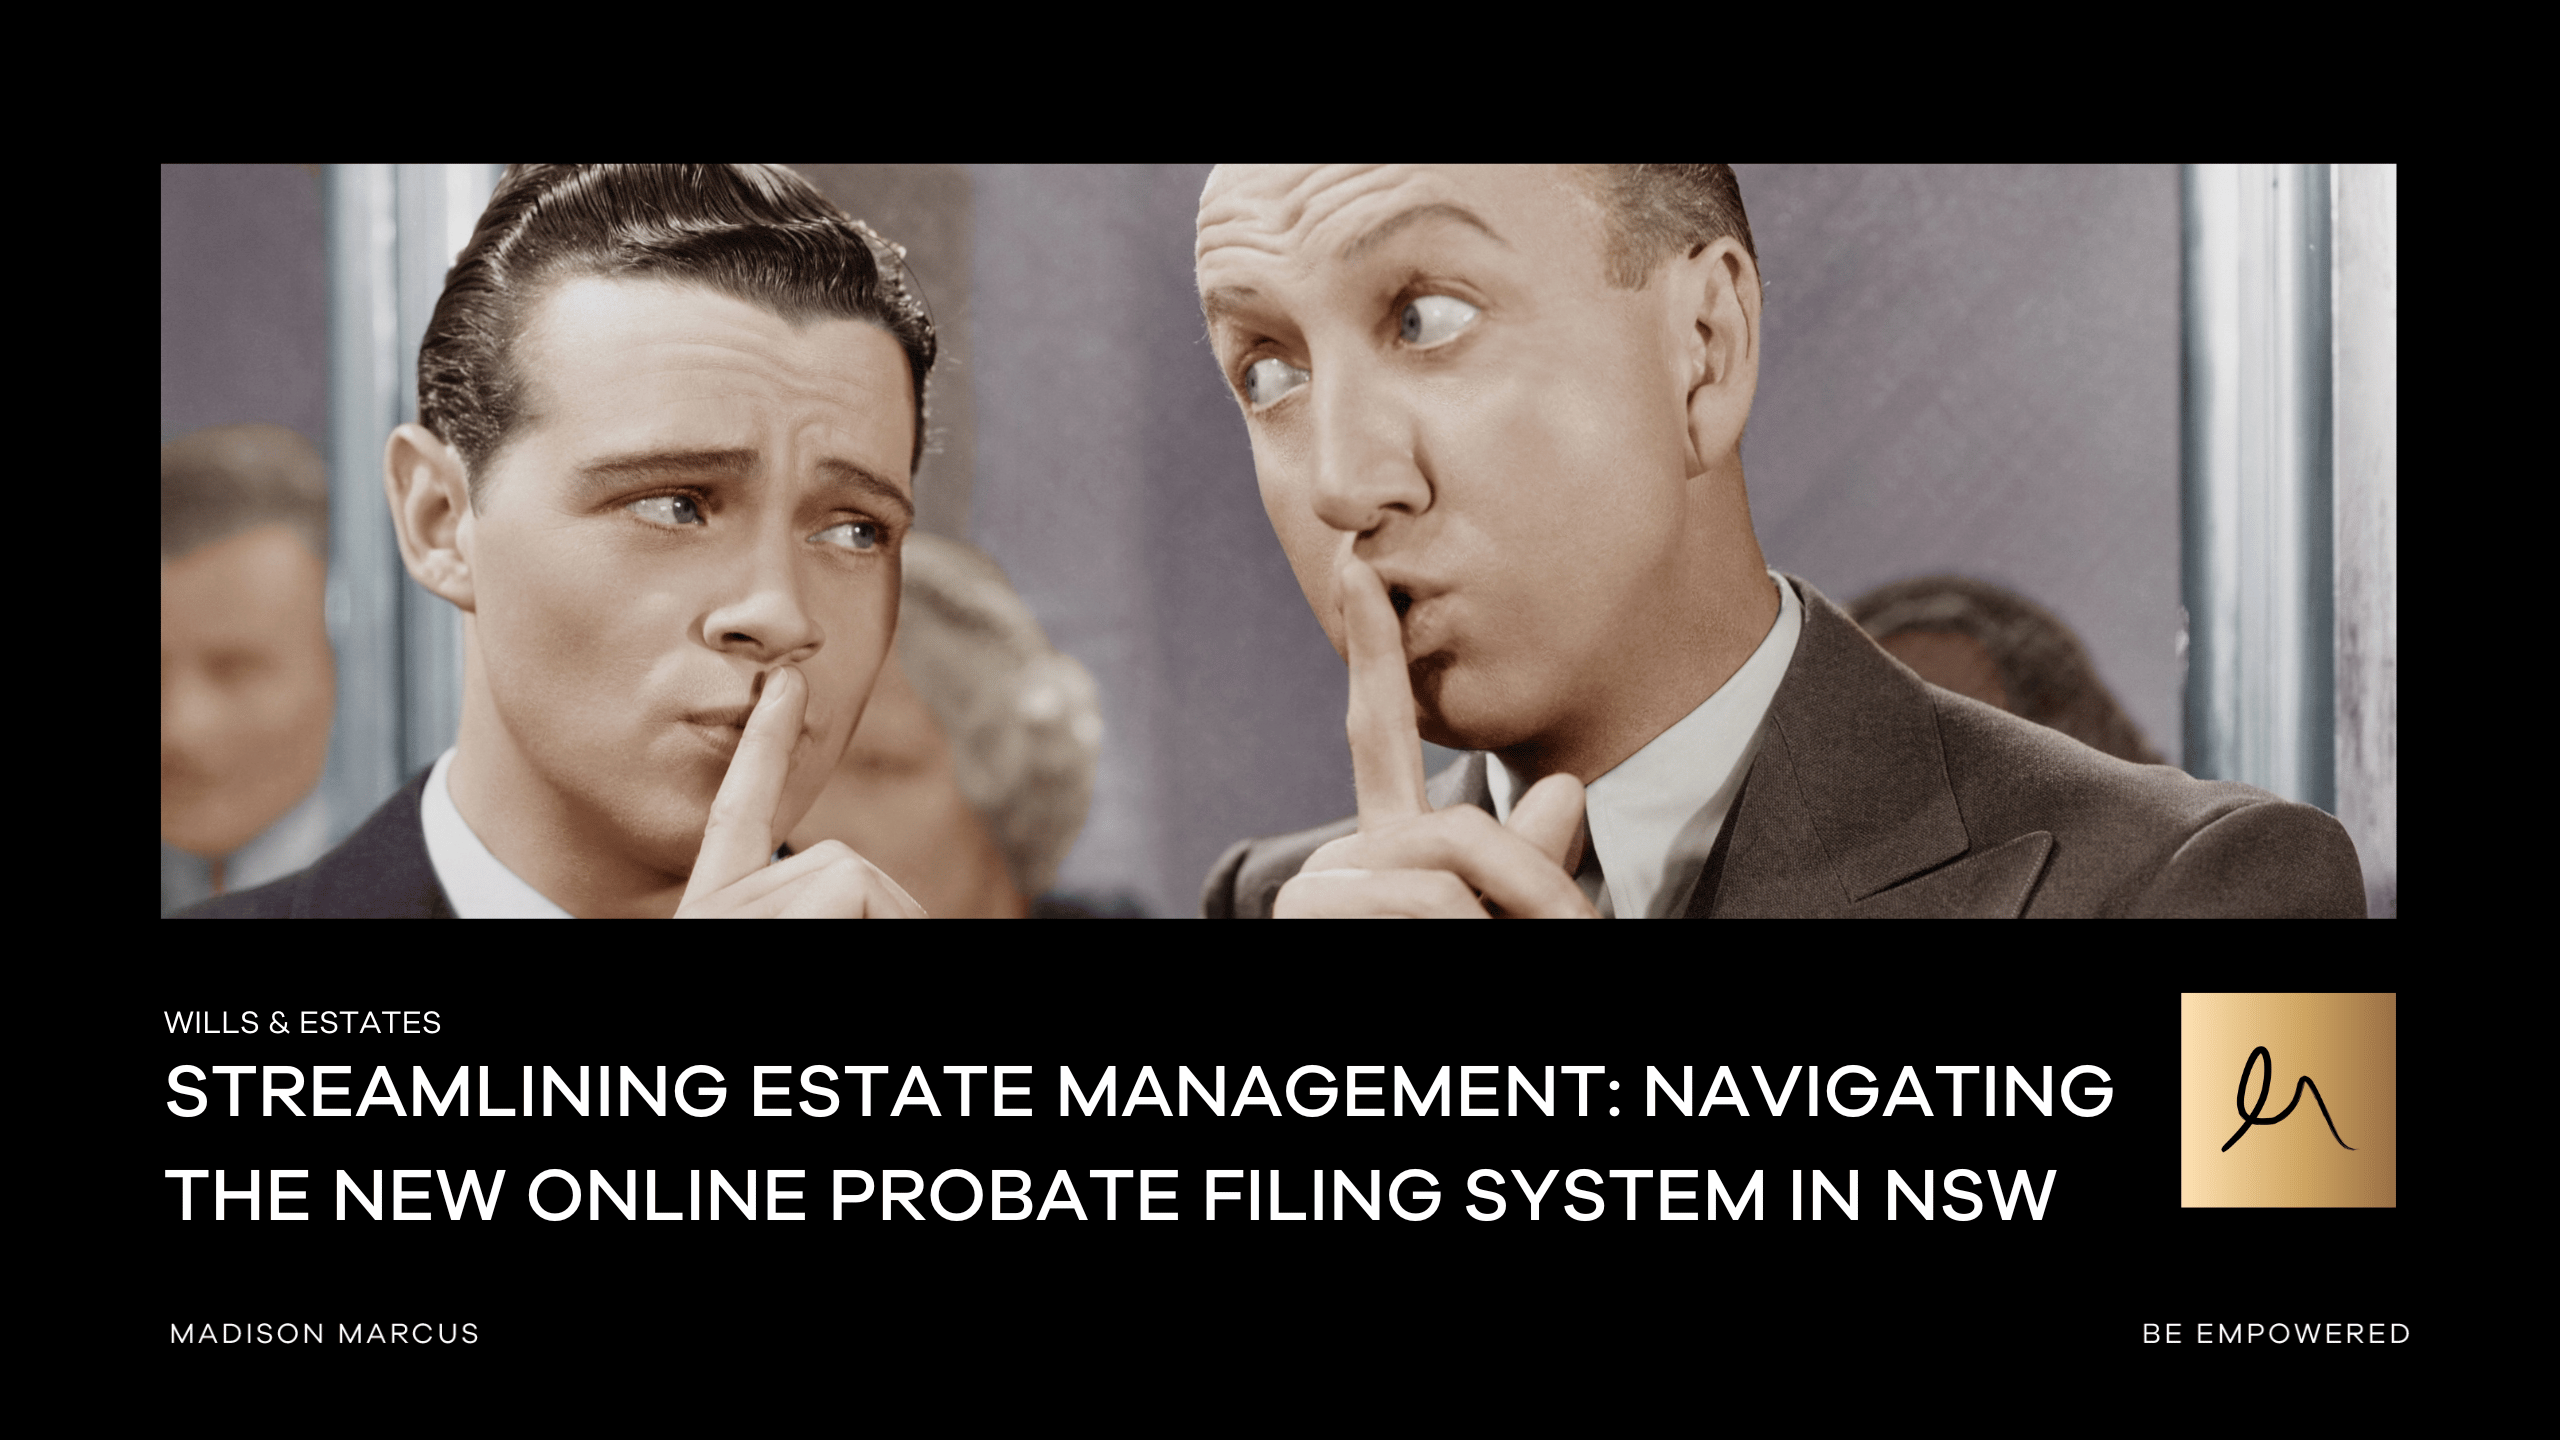 Streamlining Estate Management- Navigating the New Online Probate Filing System in NSW (Madison Marcus)